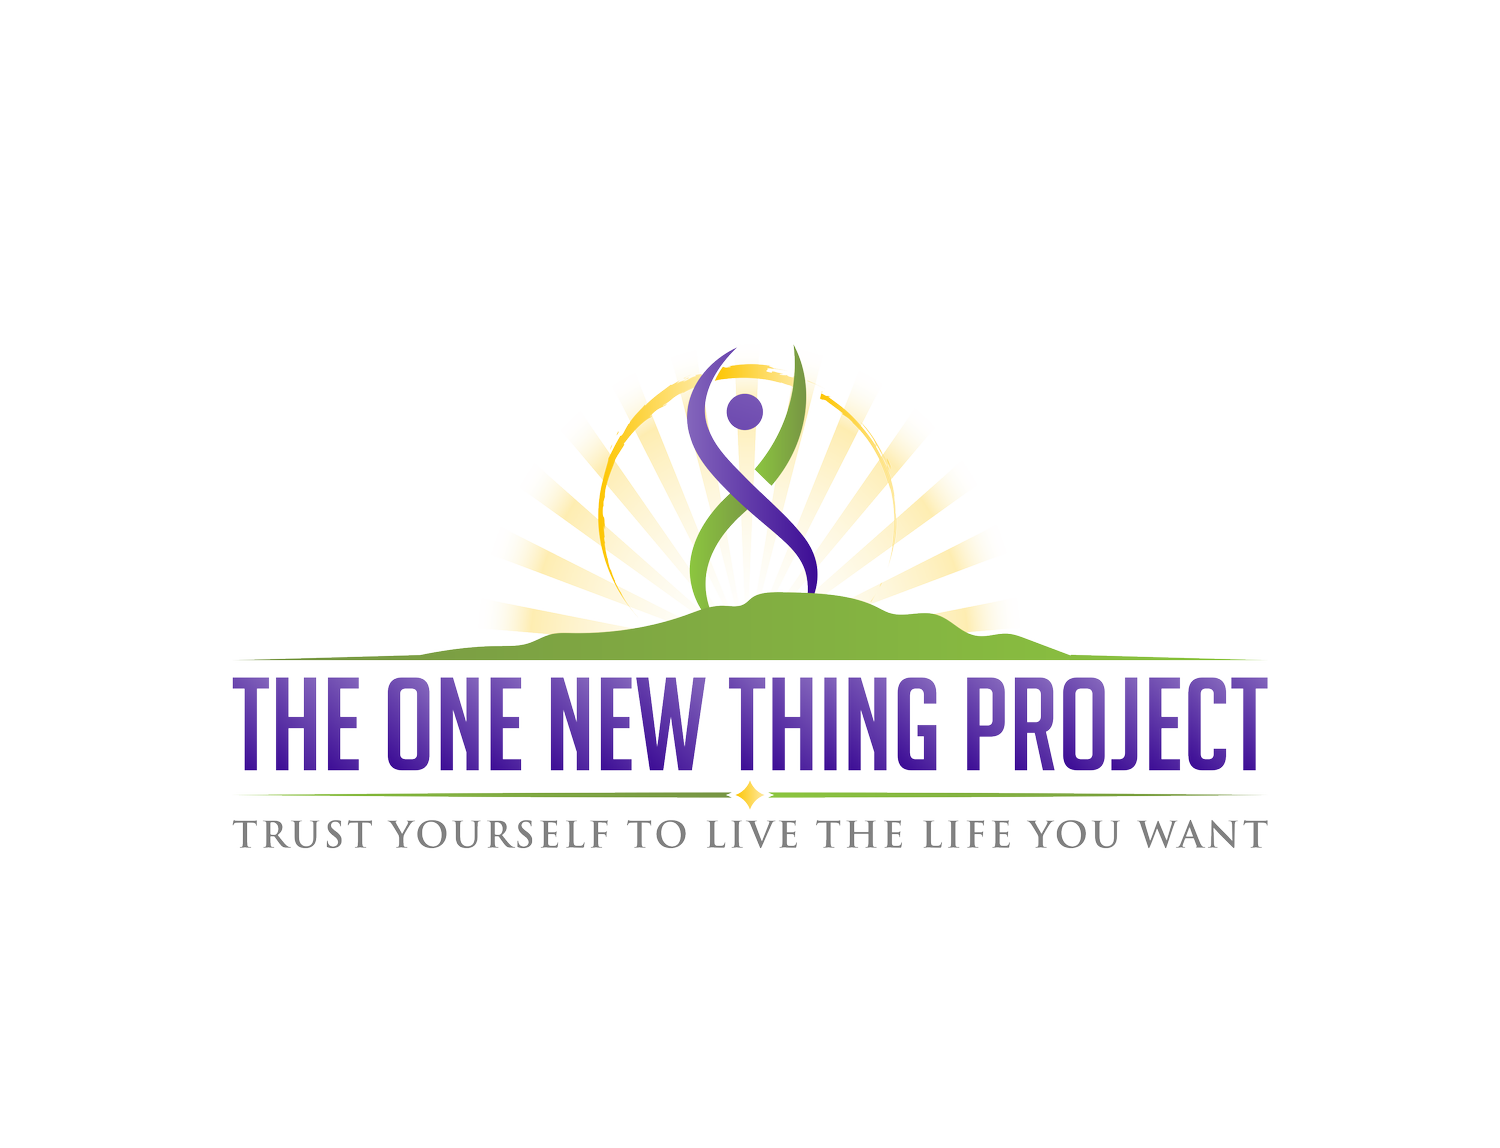 The One New Thing Project